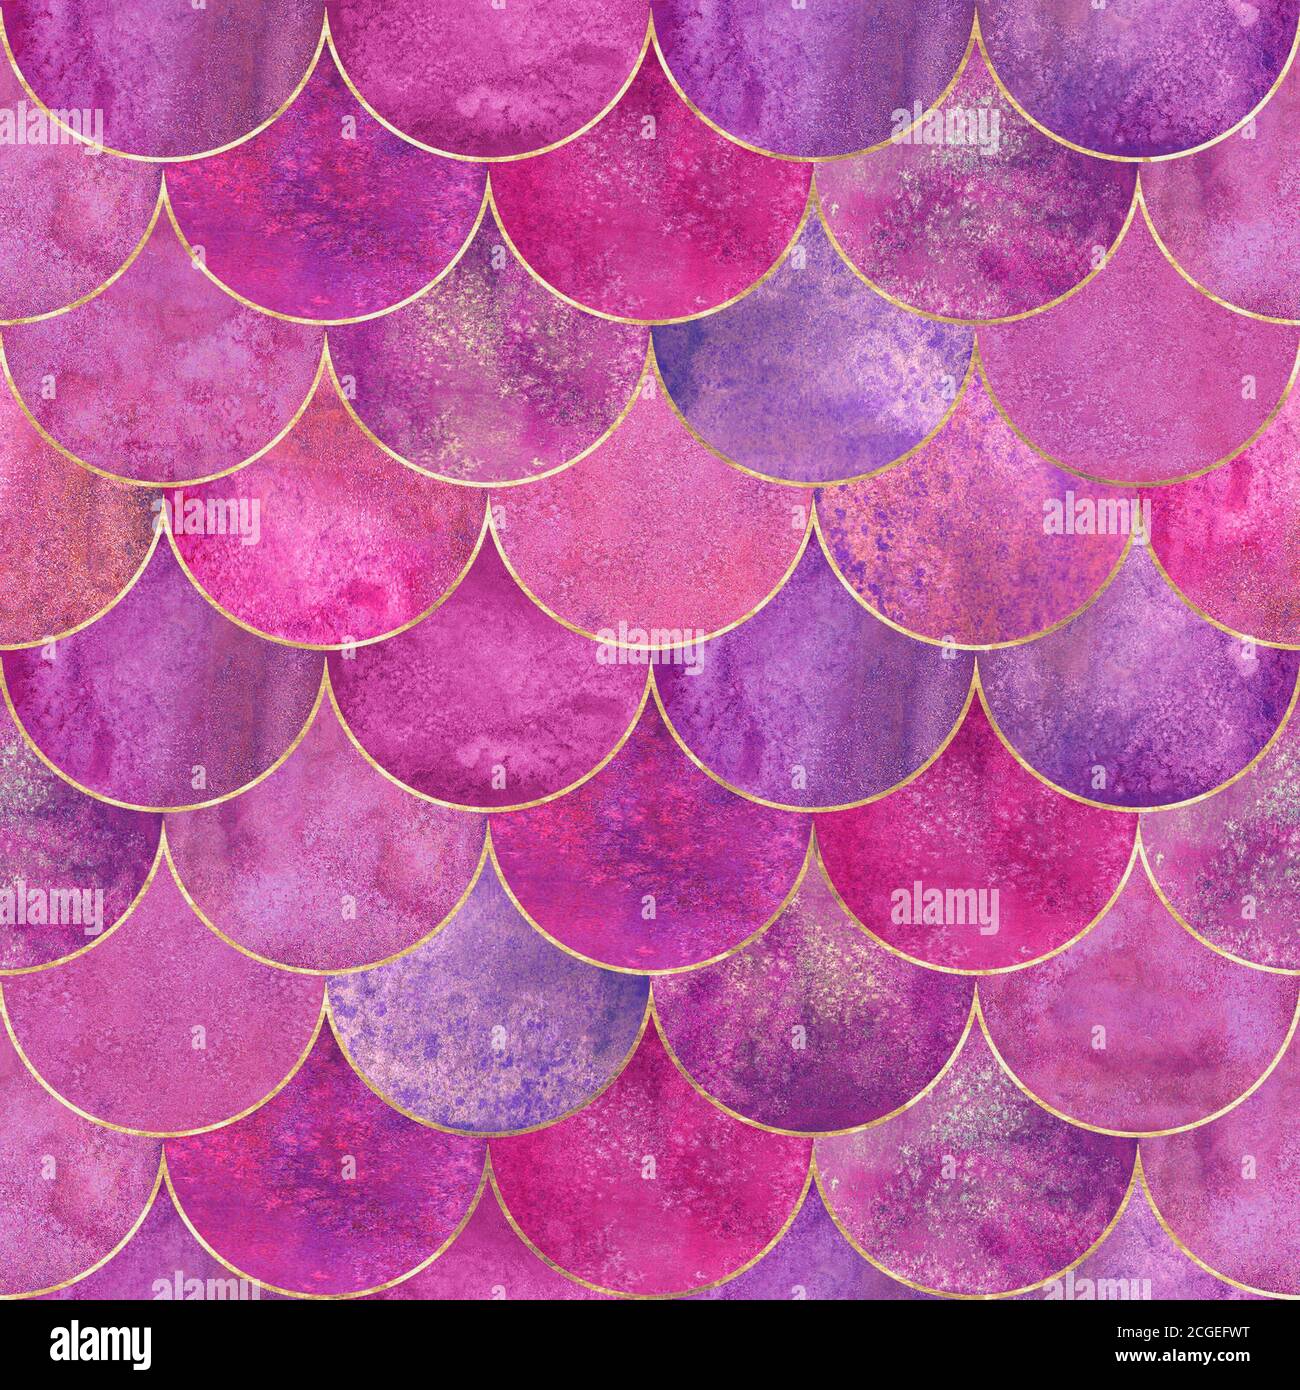 Mermaid fish scale wave japanese luxury colorful seamless pattern. Watercolor hand drawn pink purple background with gold line. Watercolour scales sha Stock Photo